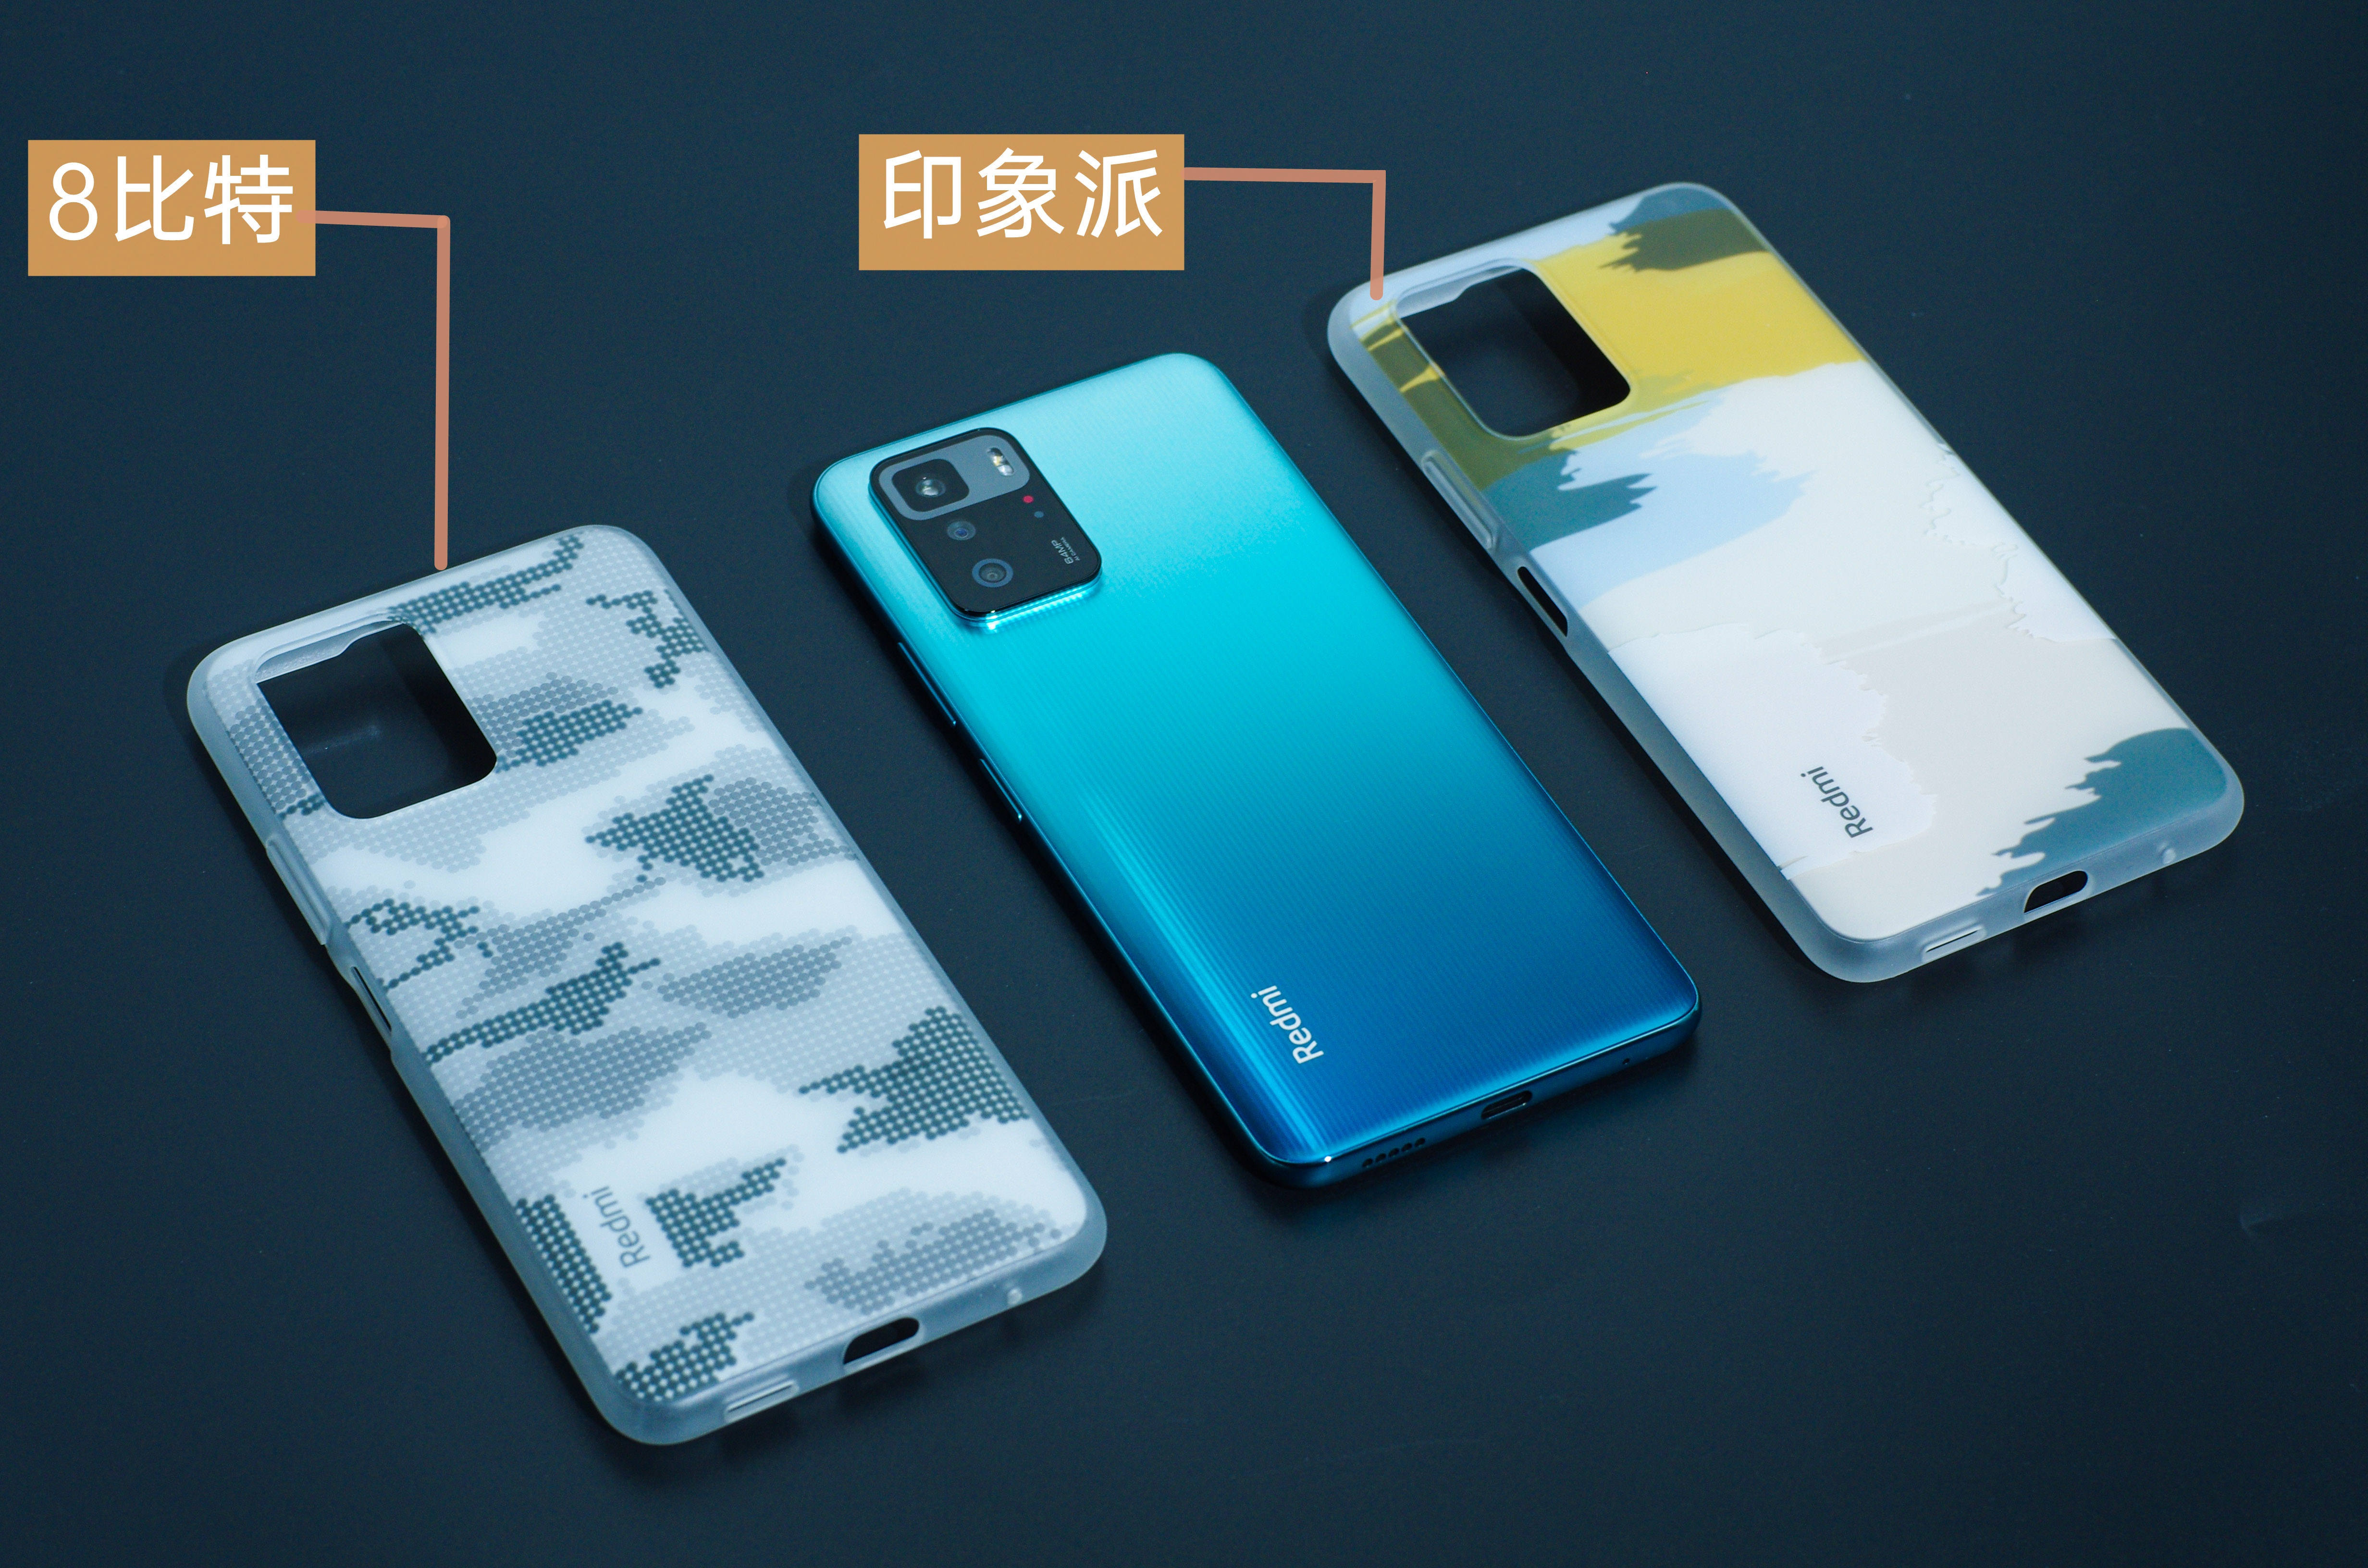 Redmi Note 10 Pro's most artistic accessory: priced at 69 yuan